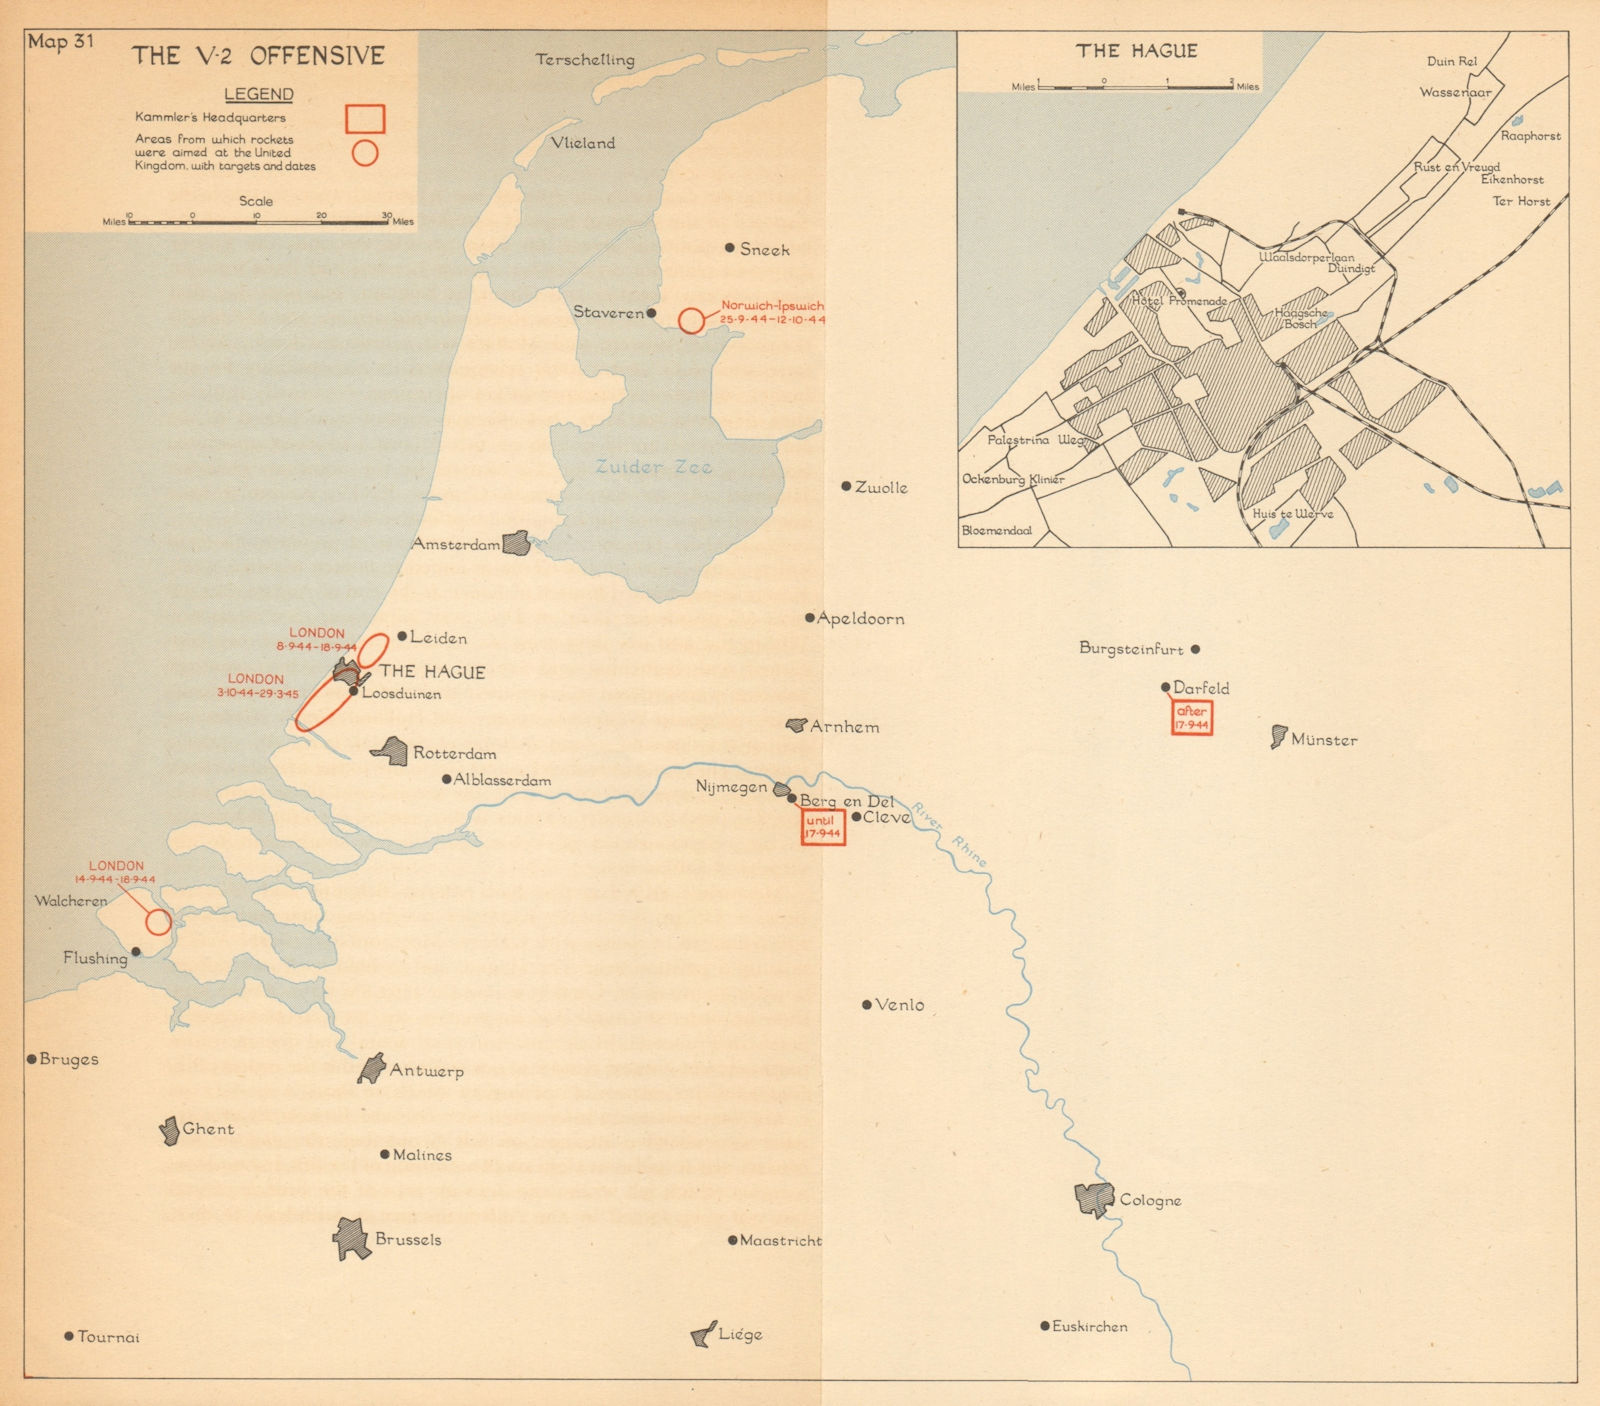 V-2 rocket launch areas UK bombardment. Sept 1944-March 1945. The Hague 1957 map